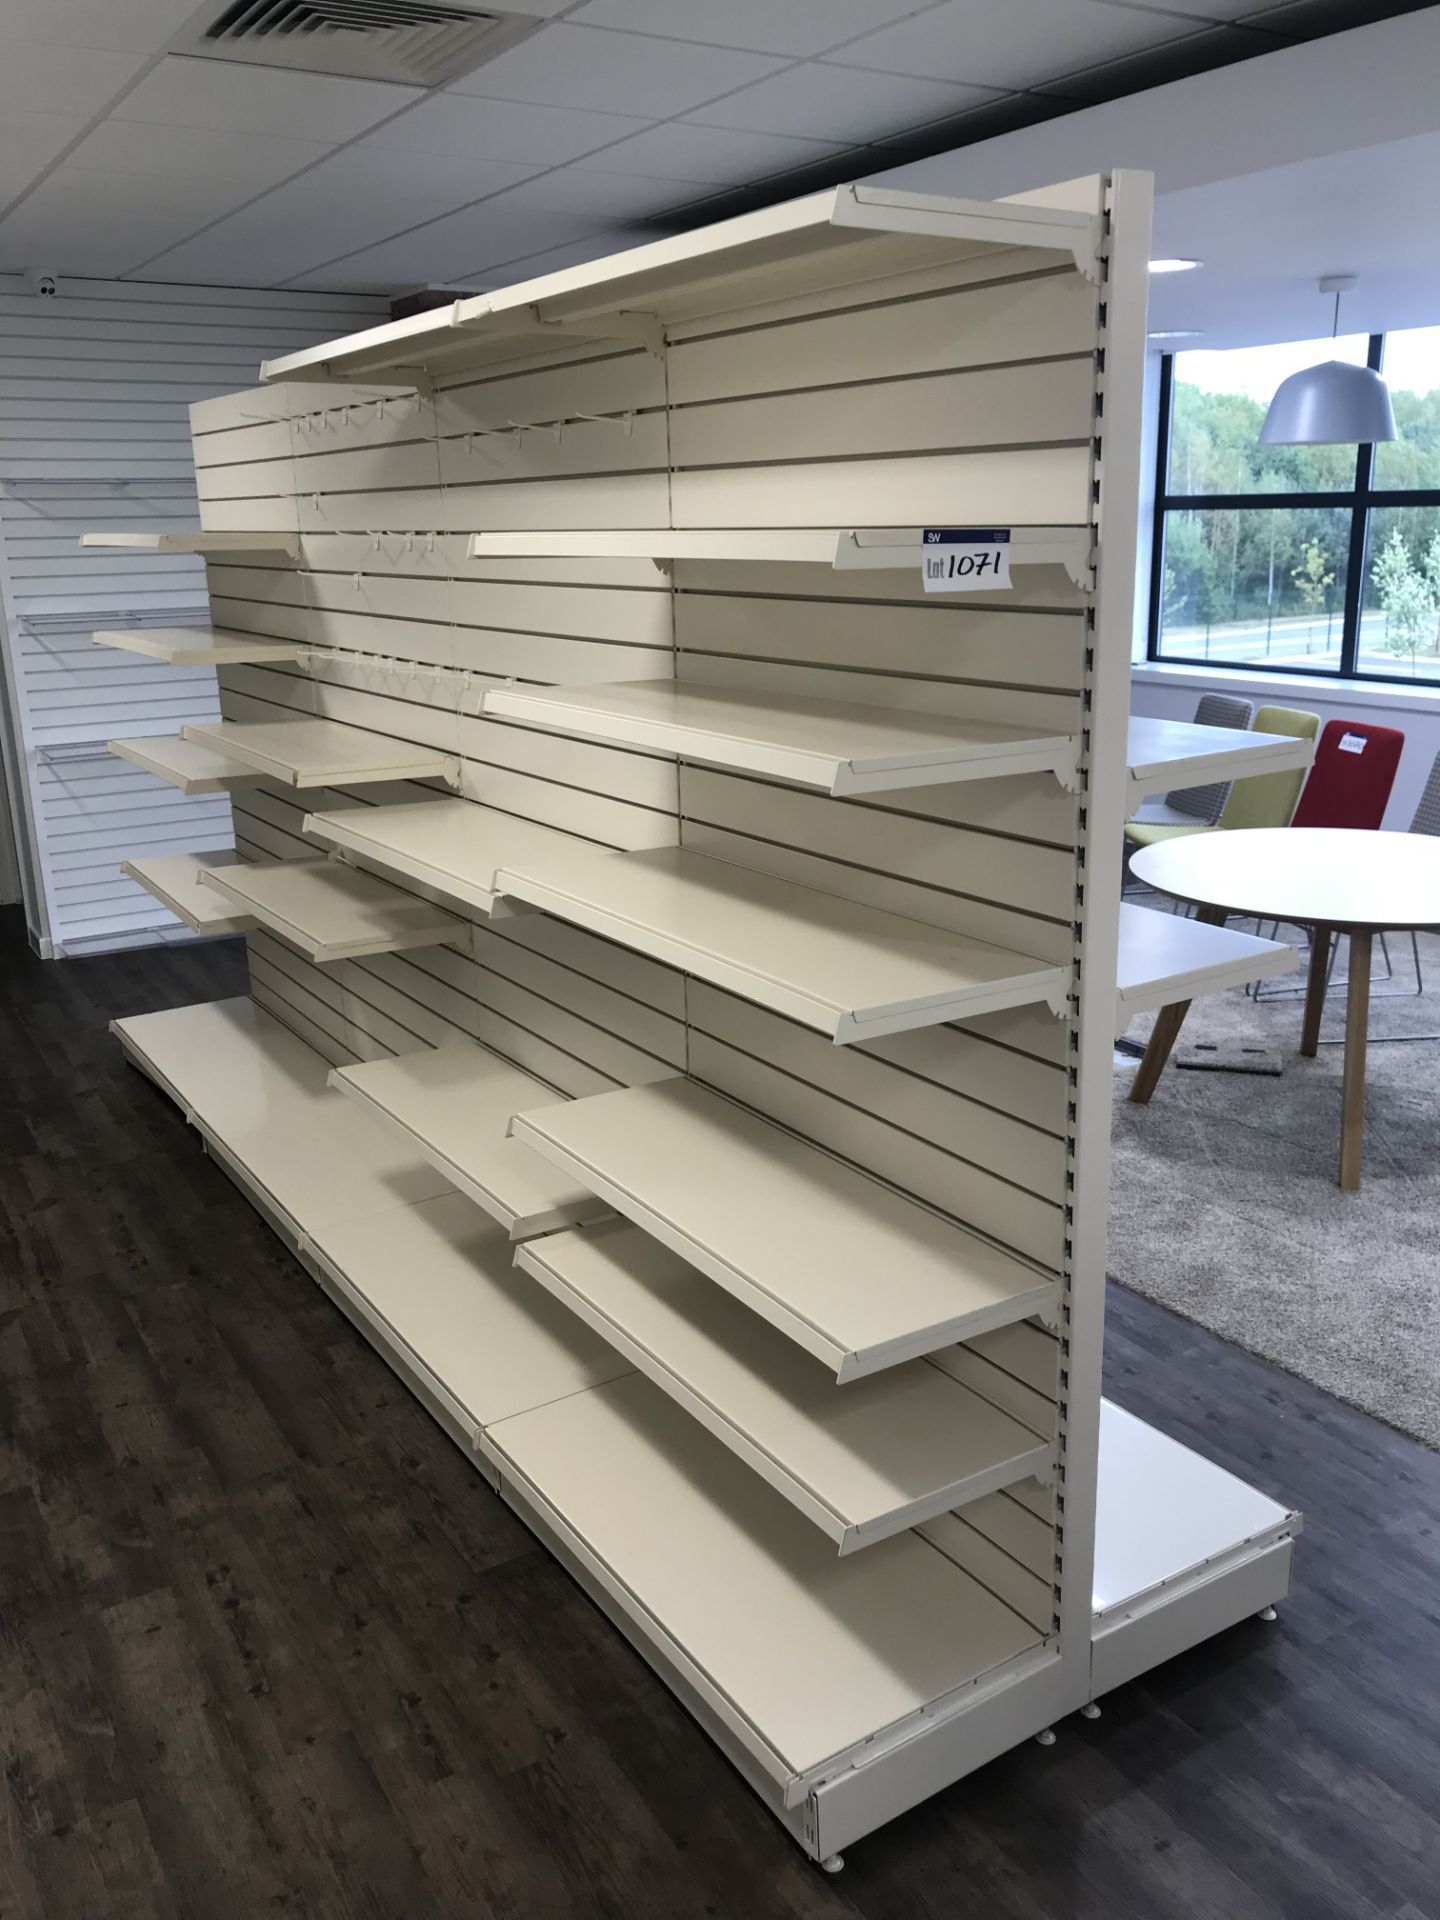 4 x Bays of Cantilever Shelving